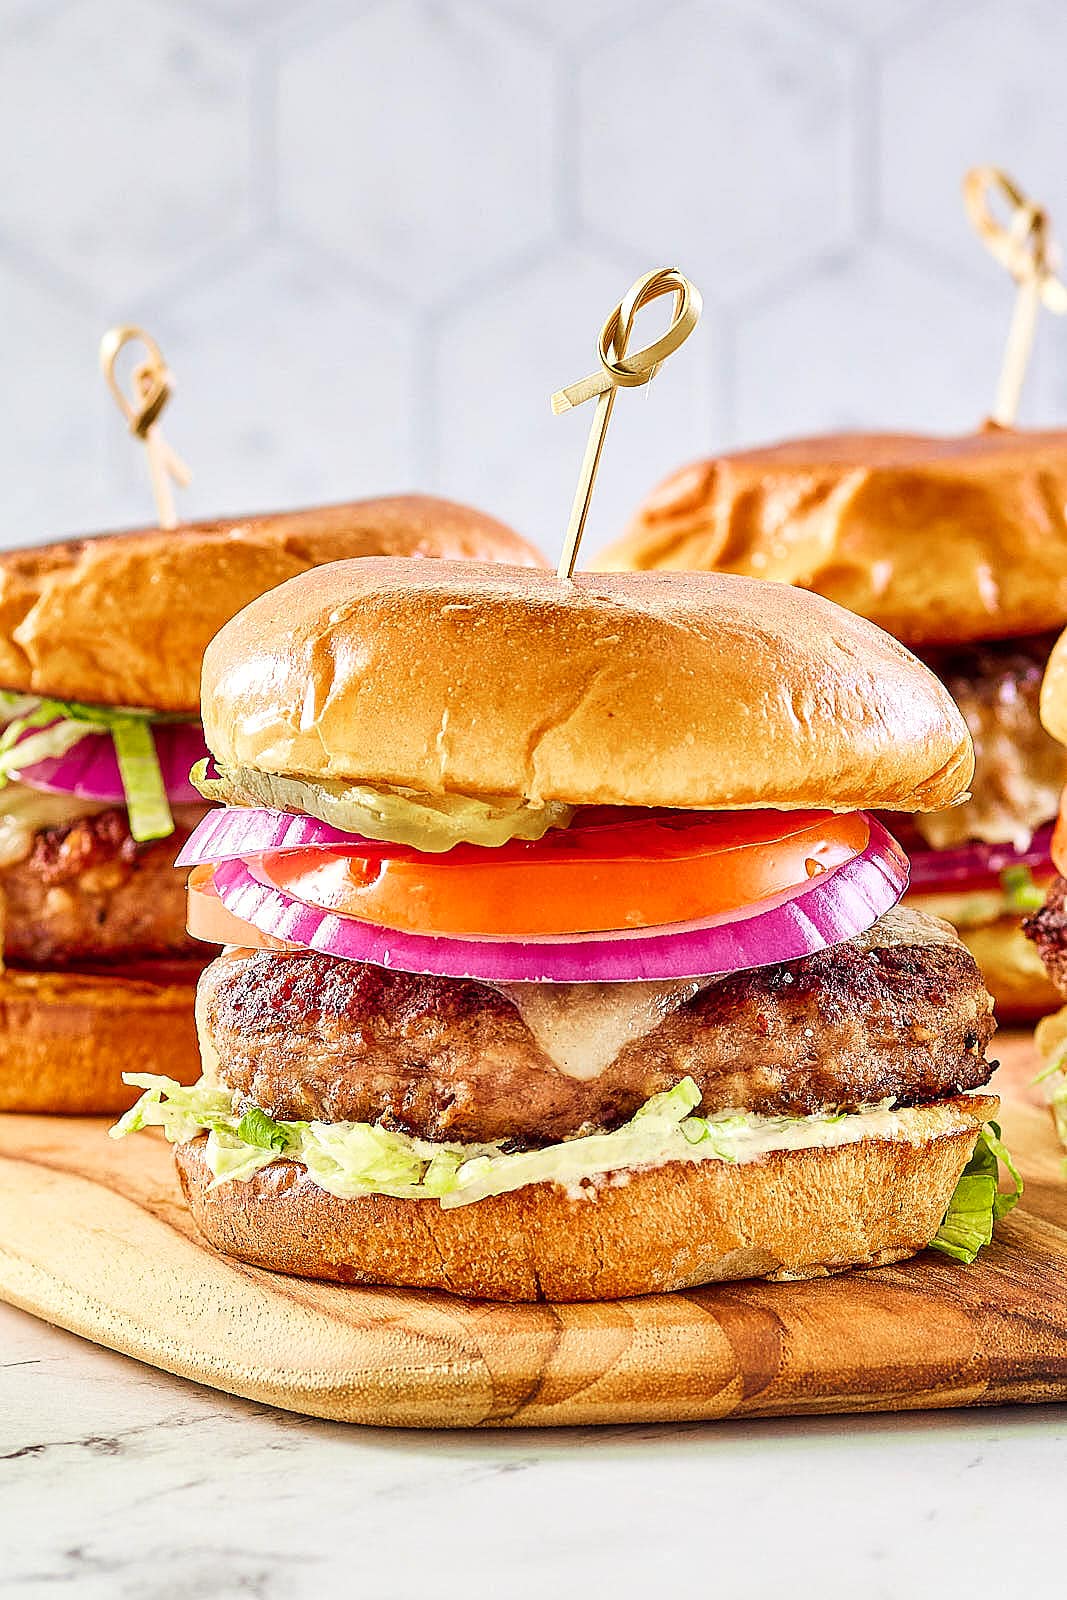 Turkey Burger Recipes Healthy: 5 Delicious and Nutritious Options